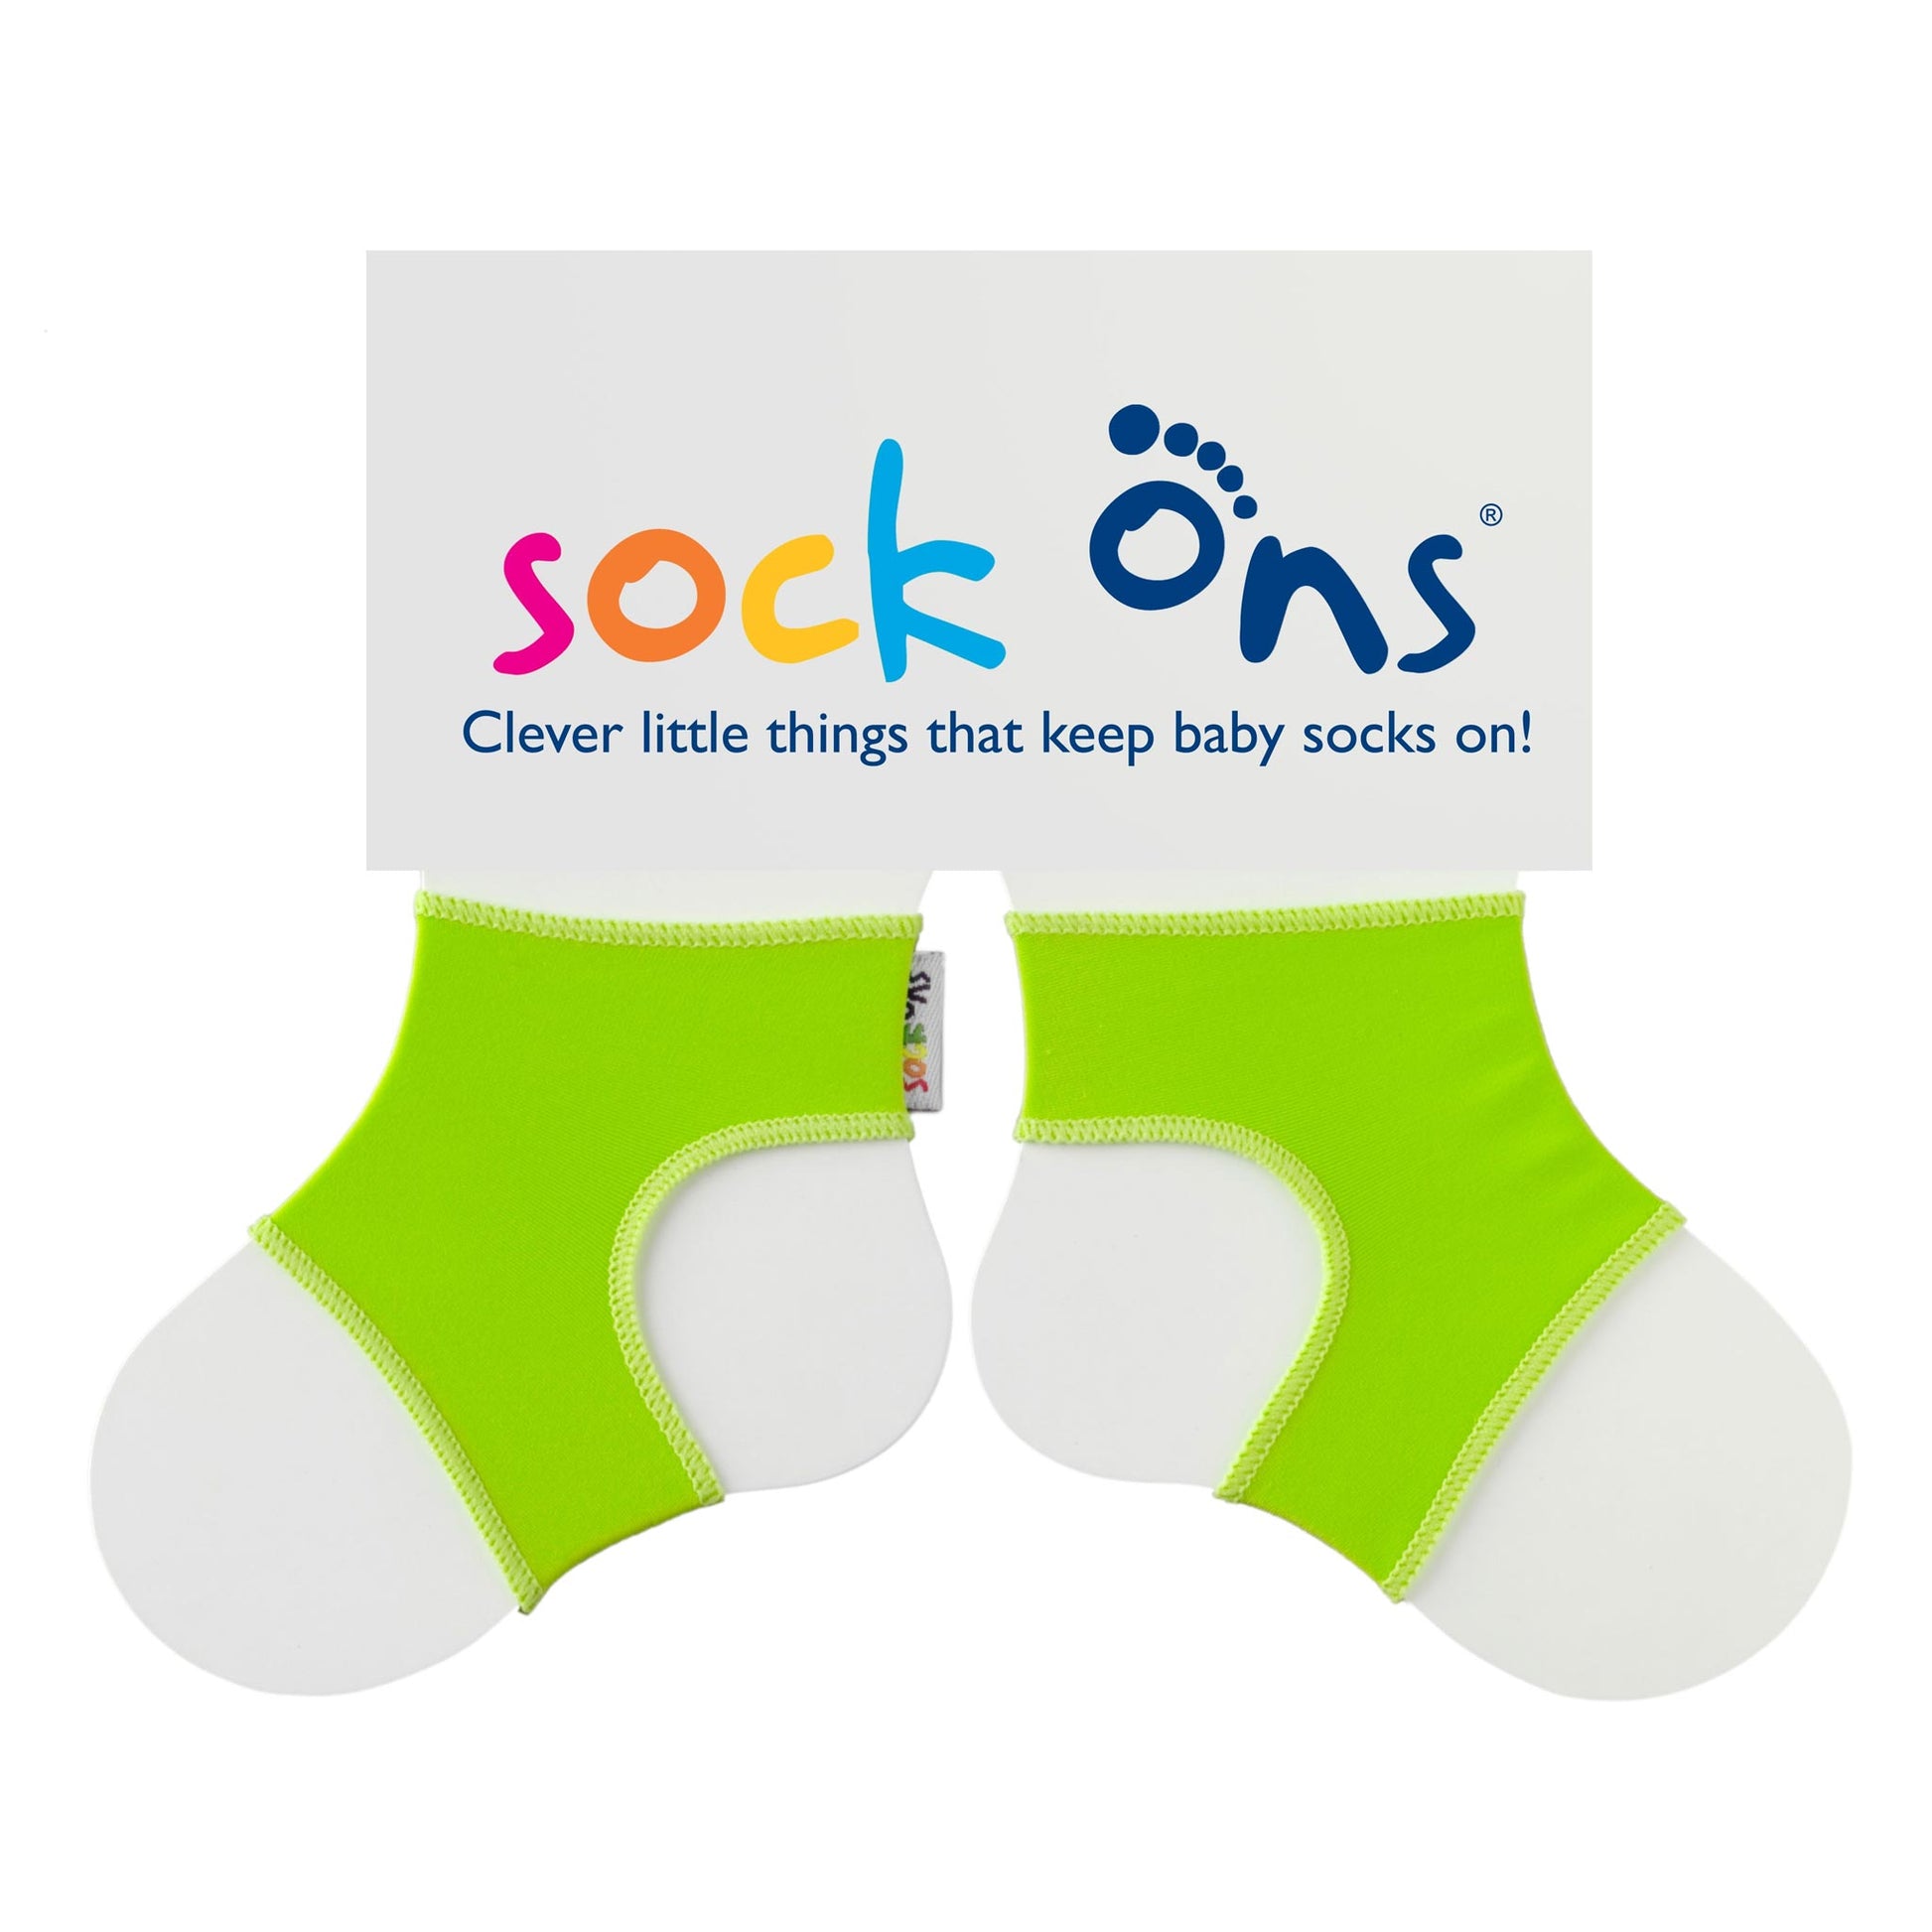 Made of soft, stretchy material, Sock Ons are designed to fit over regular socks, keeping them firmly in place no matter how hard your baby kicks and tugs.